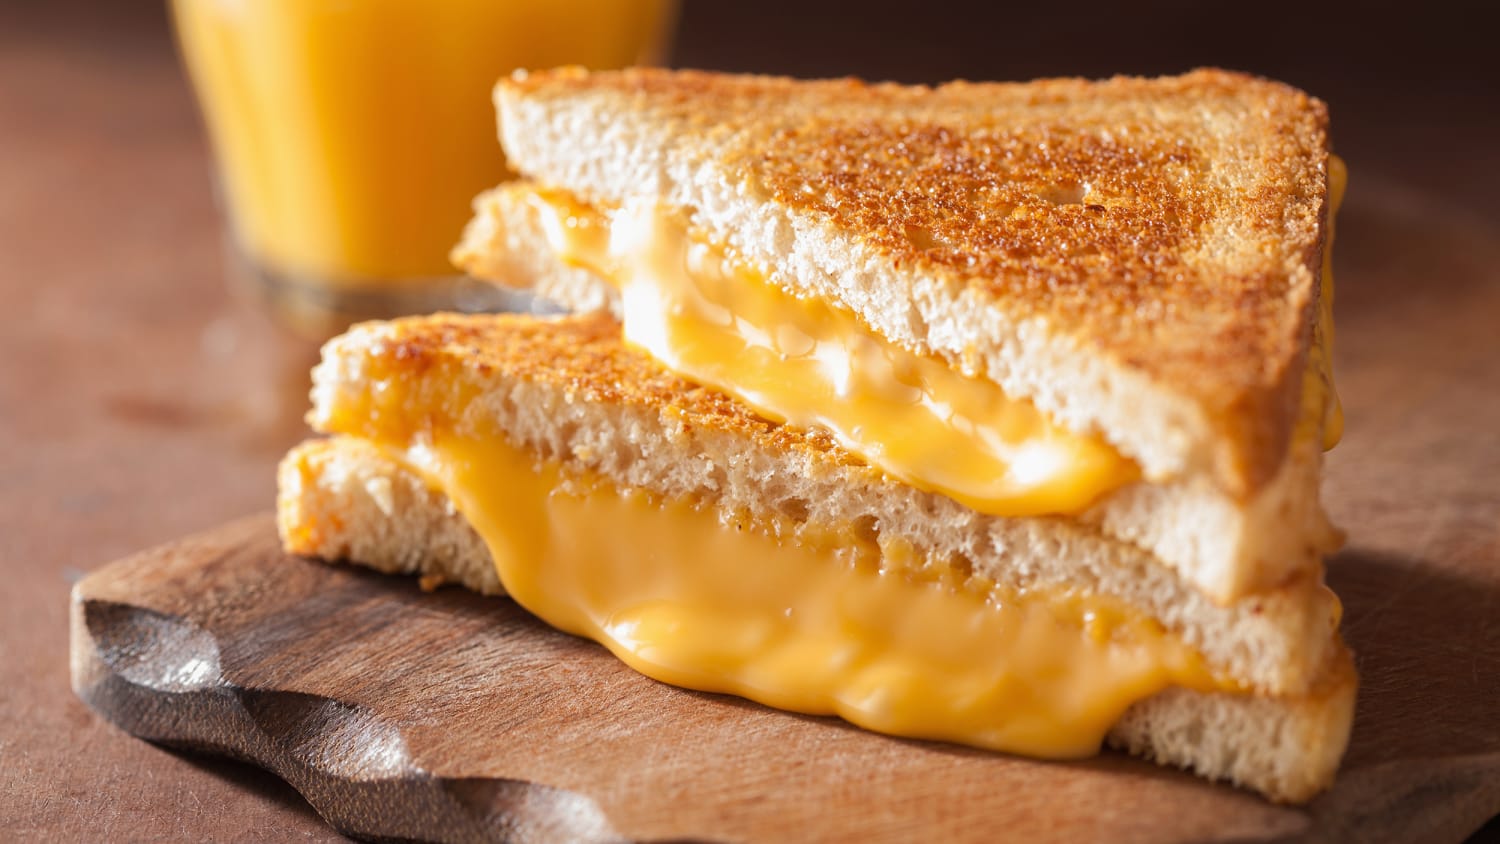 8 tips for making the perfect grilled cheese sandwich - TODAY.com